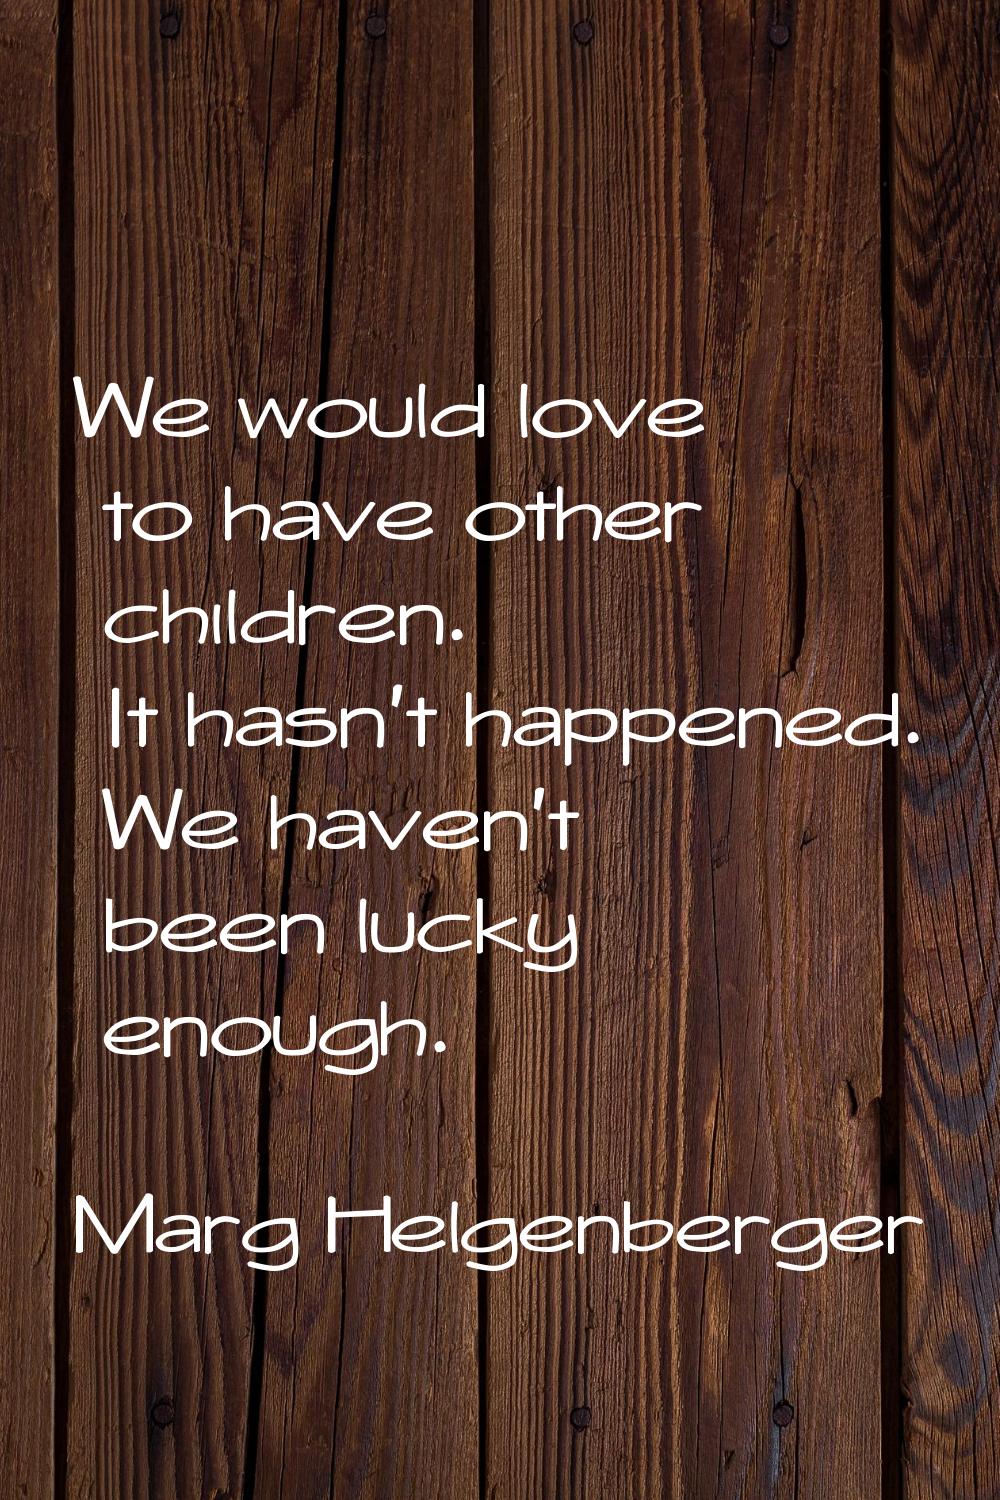 We would love to have other children. It hasn't happened. We haven't been lucky enough.